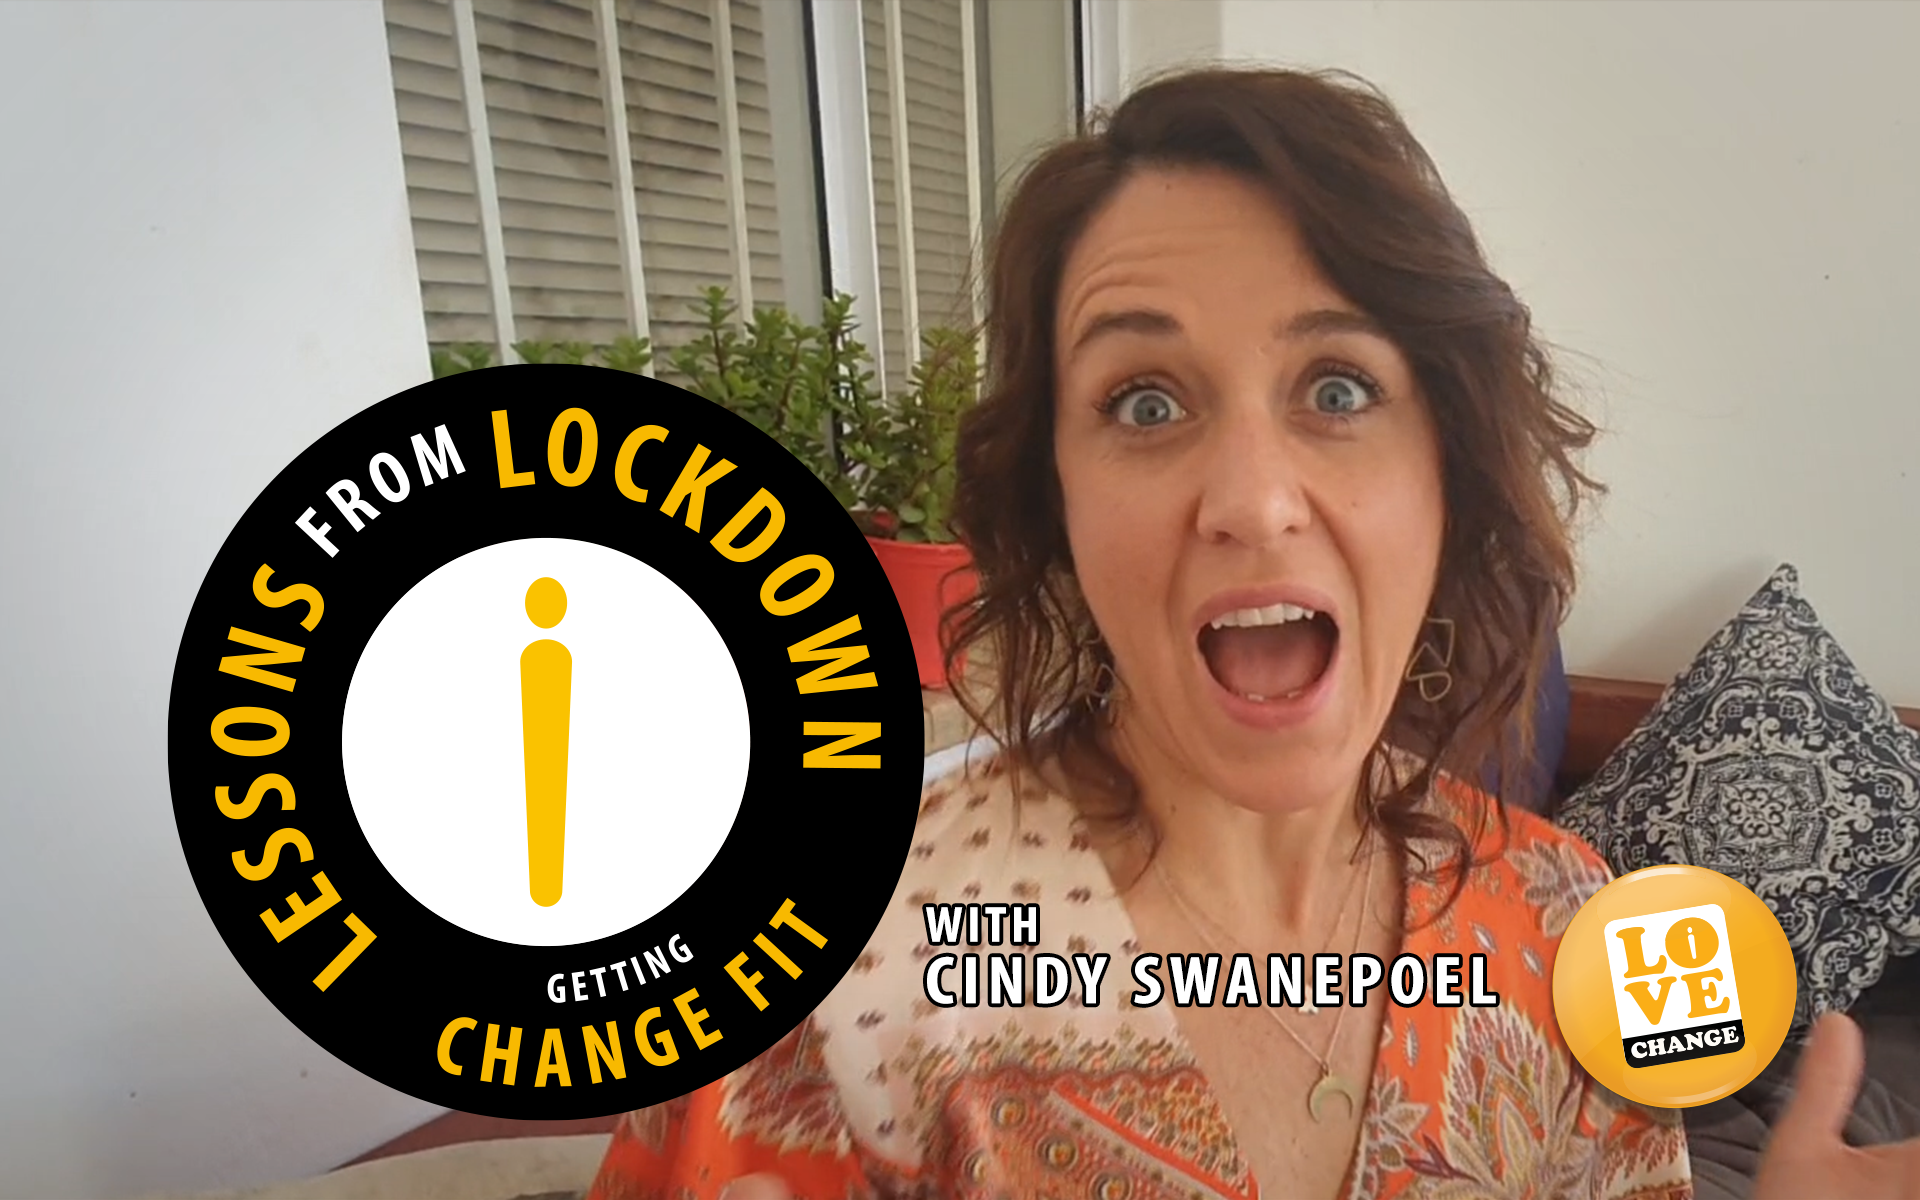 Lessons from lockdown with Cindy Swanepoel